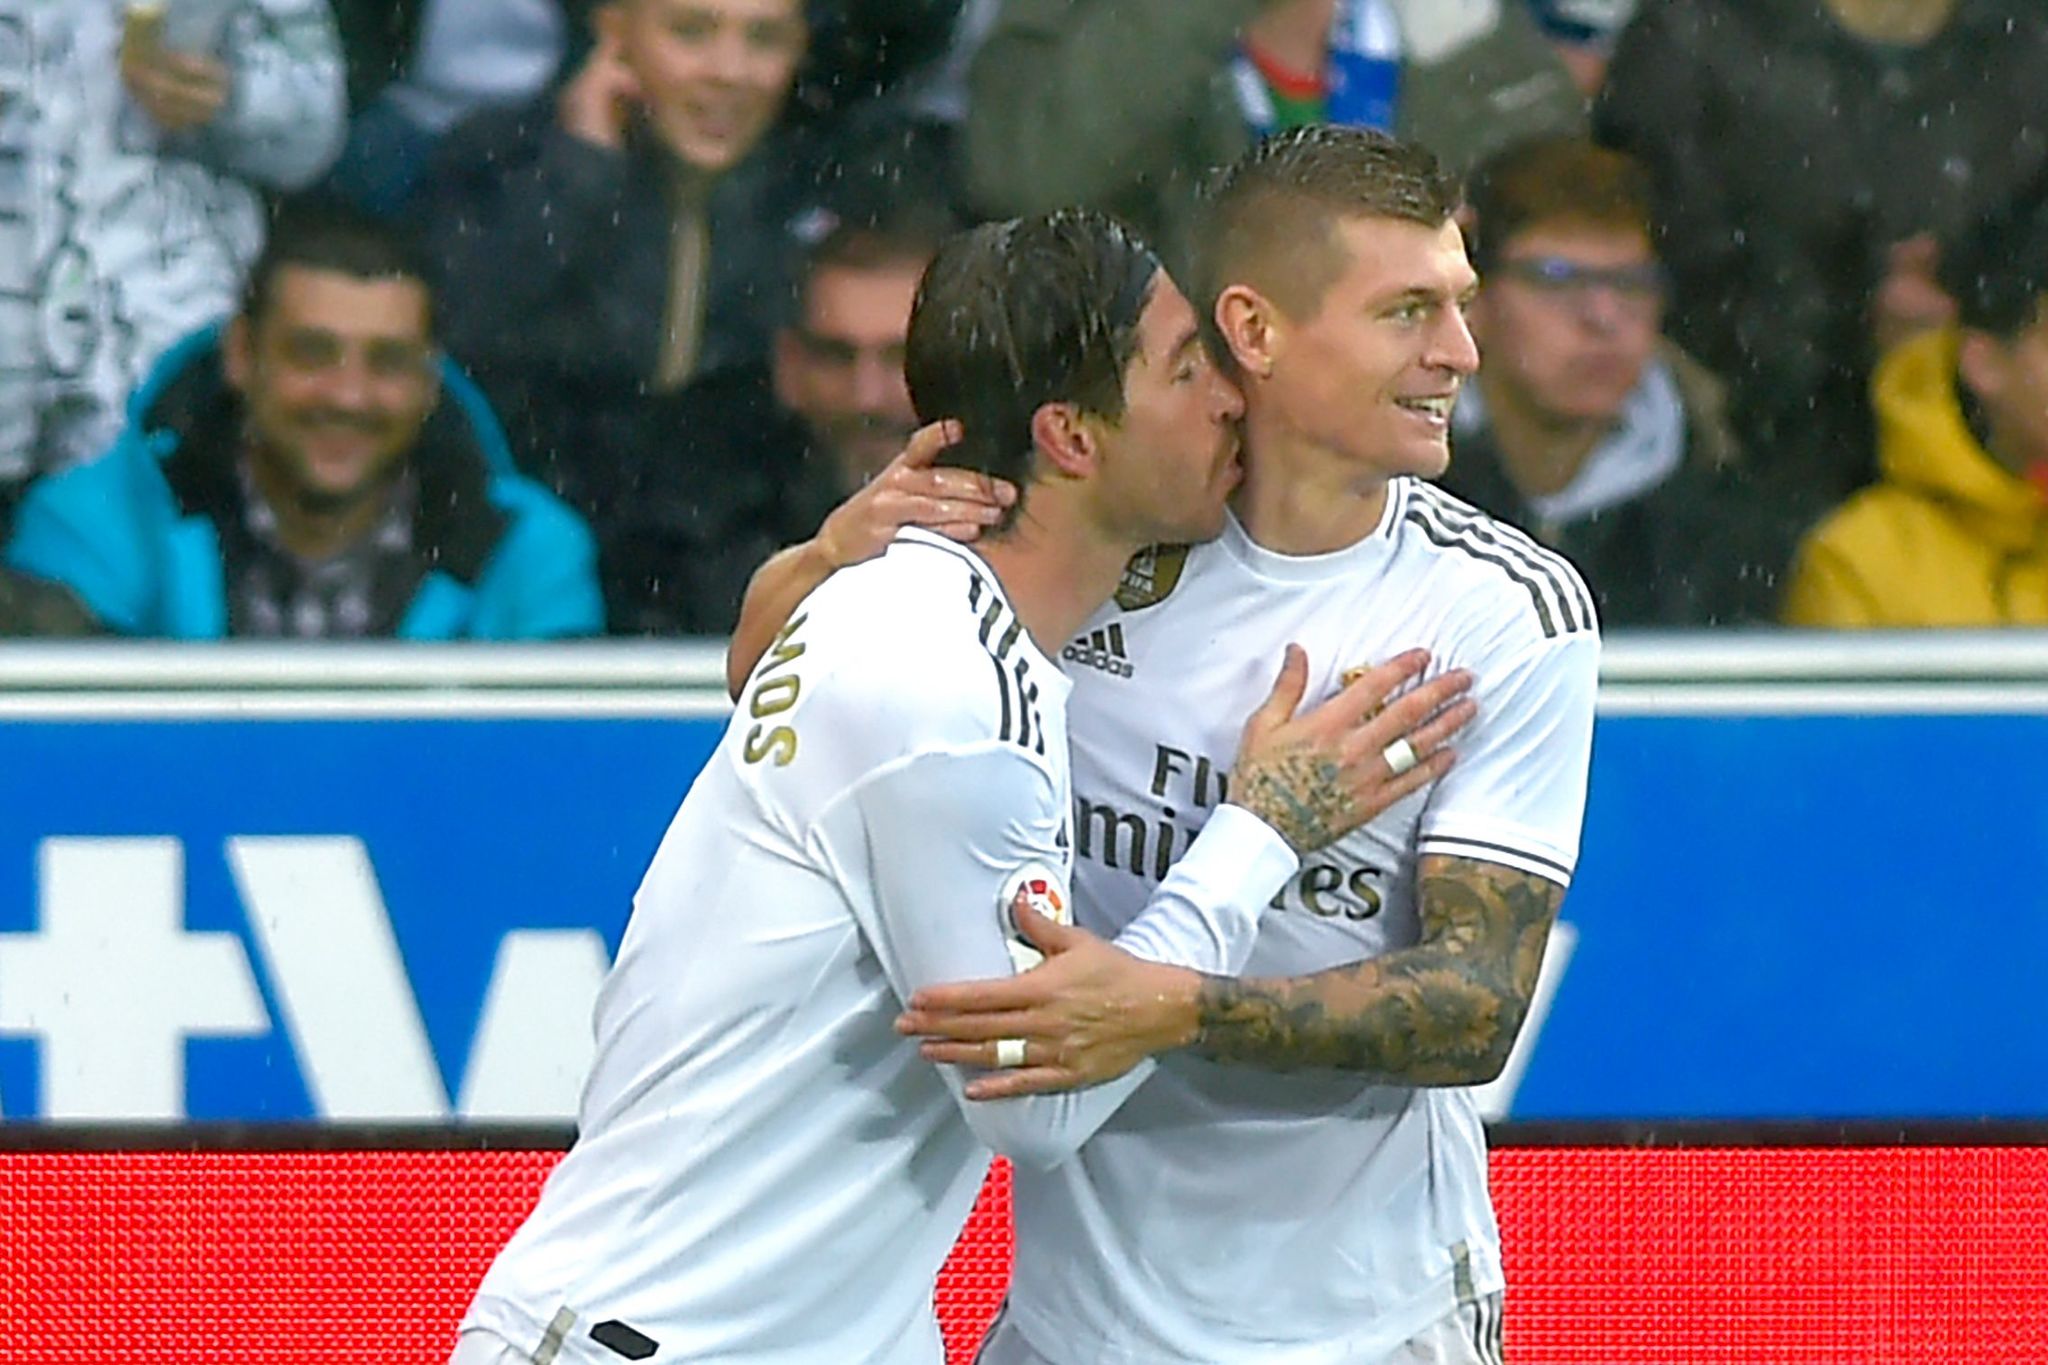 Real Madrids Spanish defender Sergio <HIT>Ramos</HIT> (L) celebrates with teammate Real Madrids German midfielder Toni <HIT>Kroos</HIT> after scoring a goal during the Spanish league football match between Deportivo Alaves and Real Madrid CF at the Mendizorroza stadium in Vitoria on November 30, 2019. (Photo by ANDER GILLENEA / AFP)